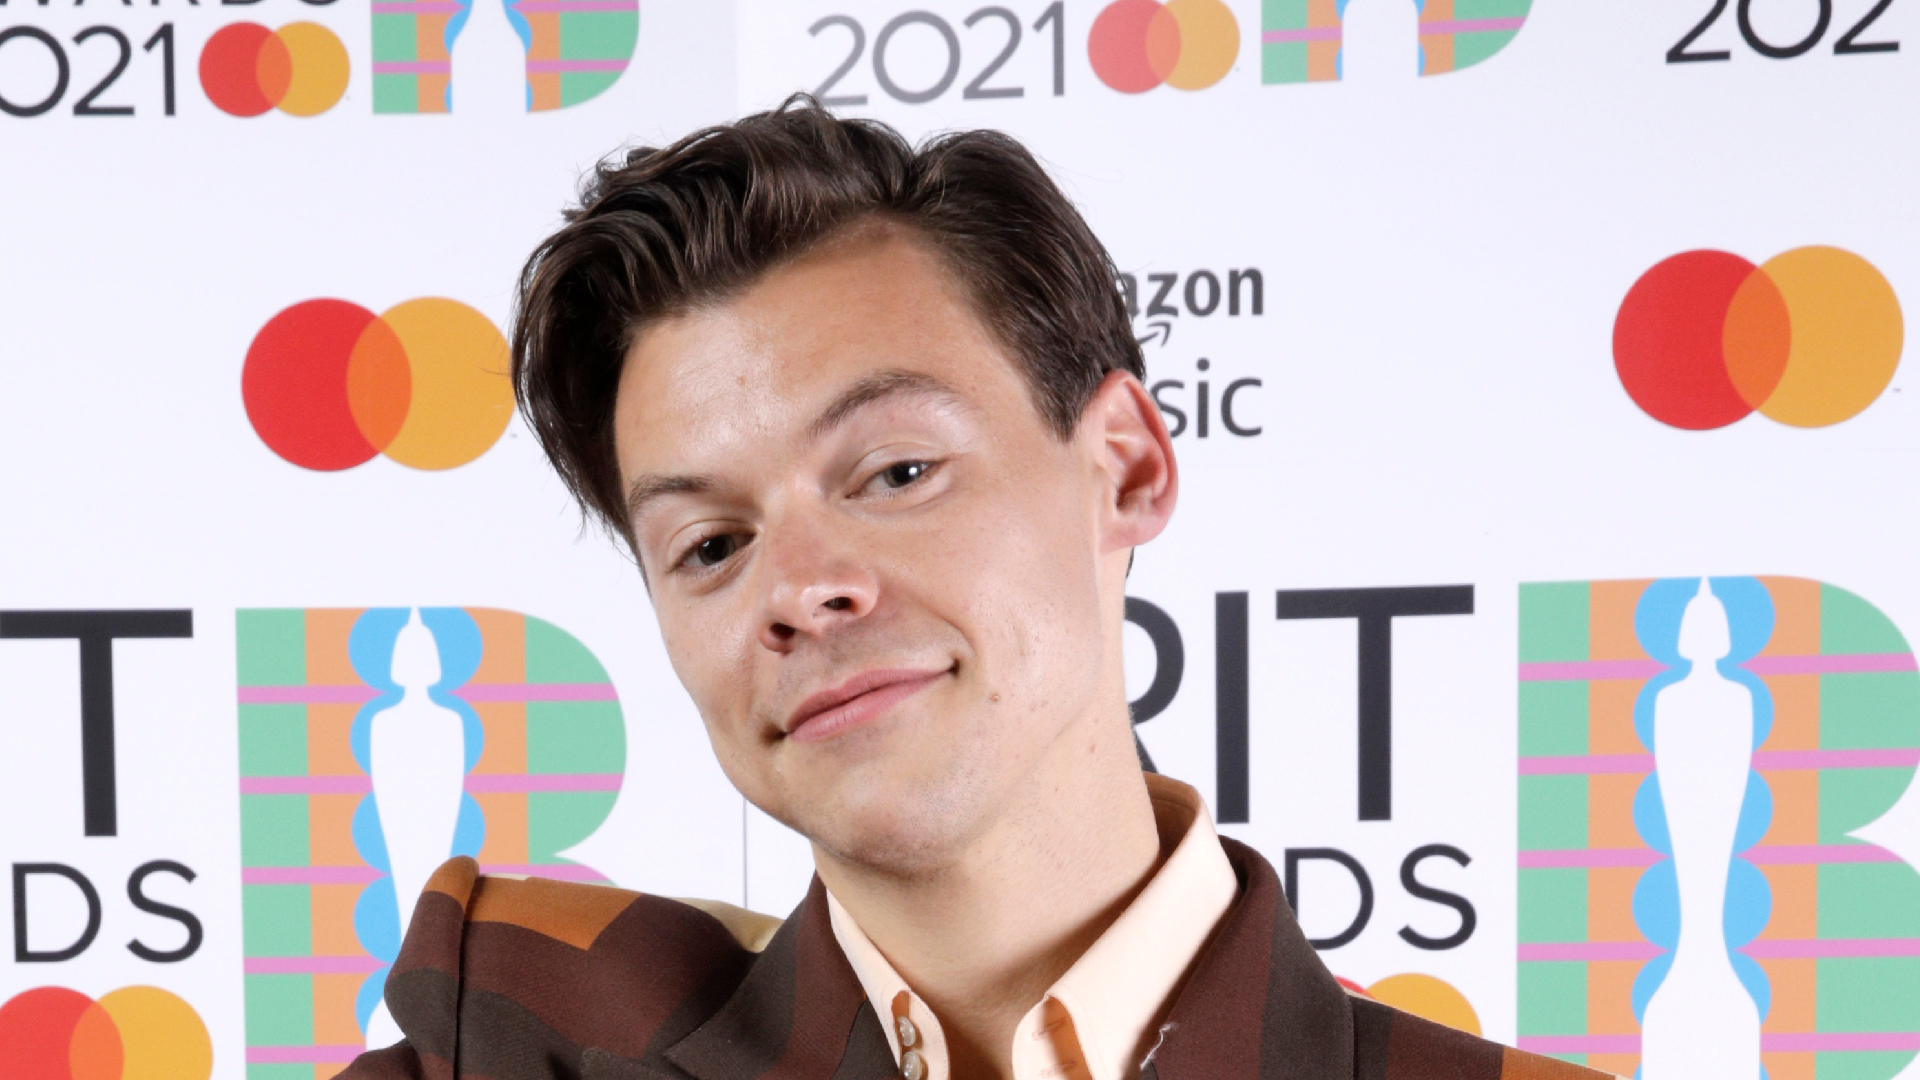 Harry Styles: Brit Awards 2021 Hairstyle | Man For Himself